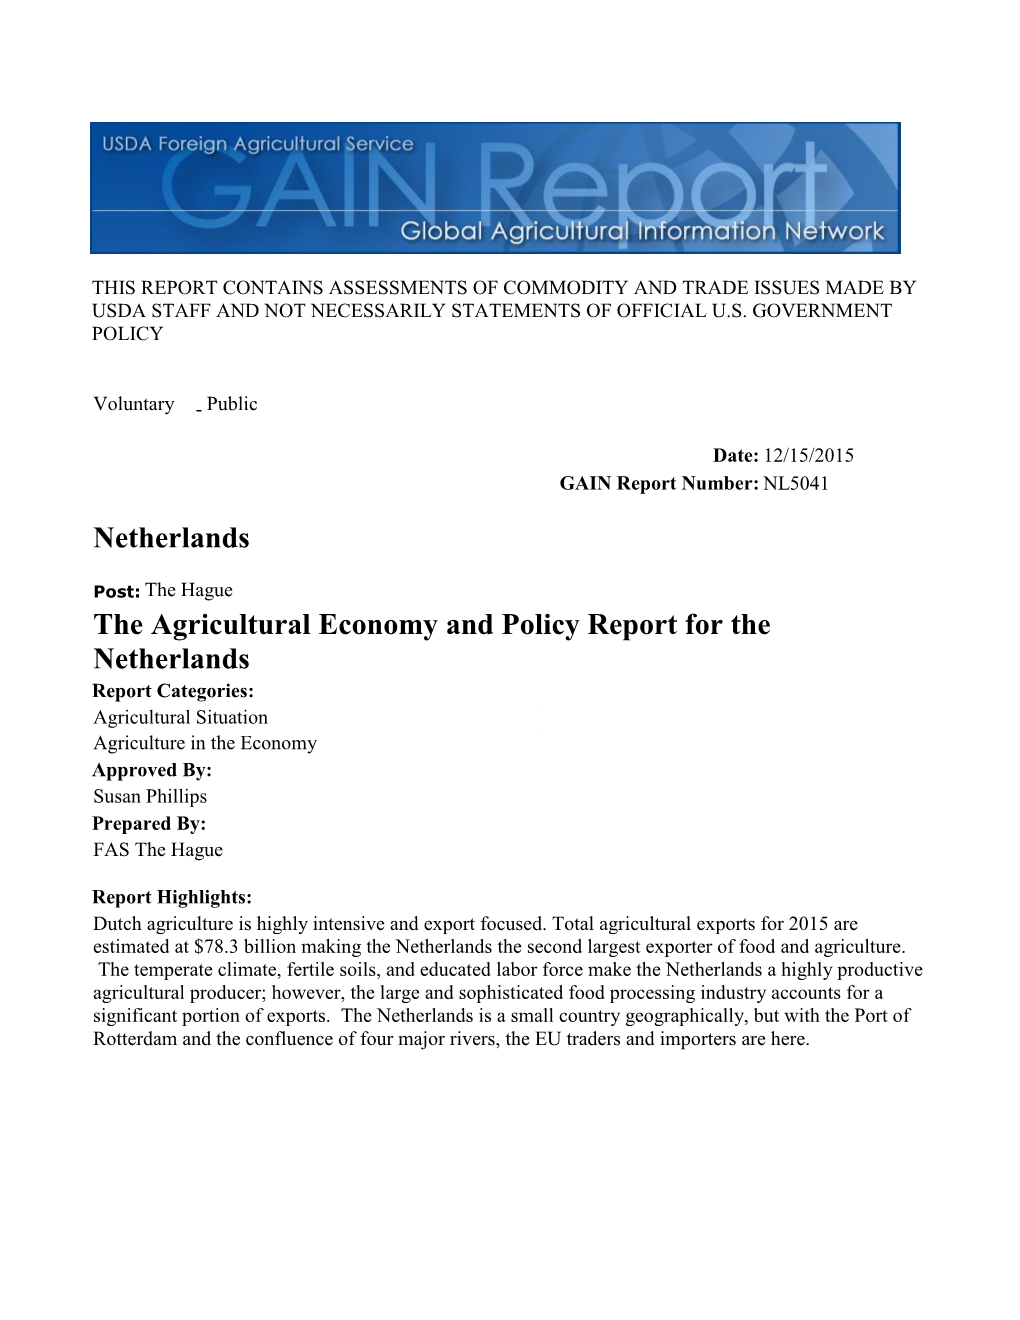 Agricultural Economy and Policy Report for the Netherlands